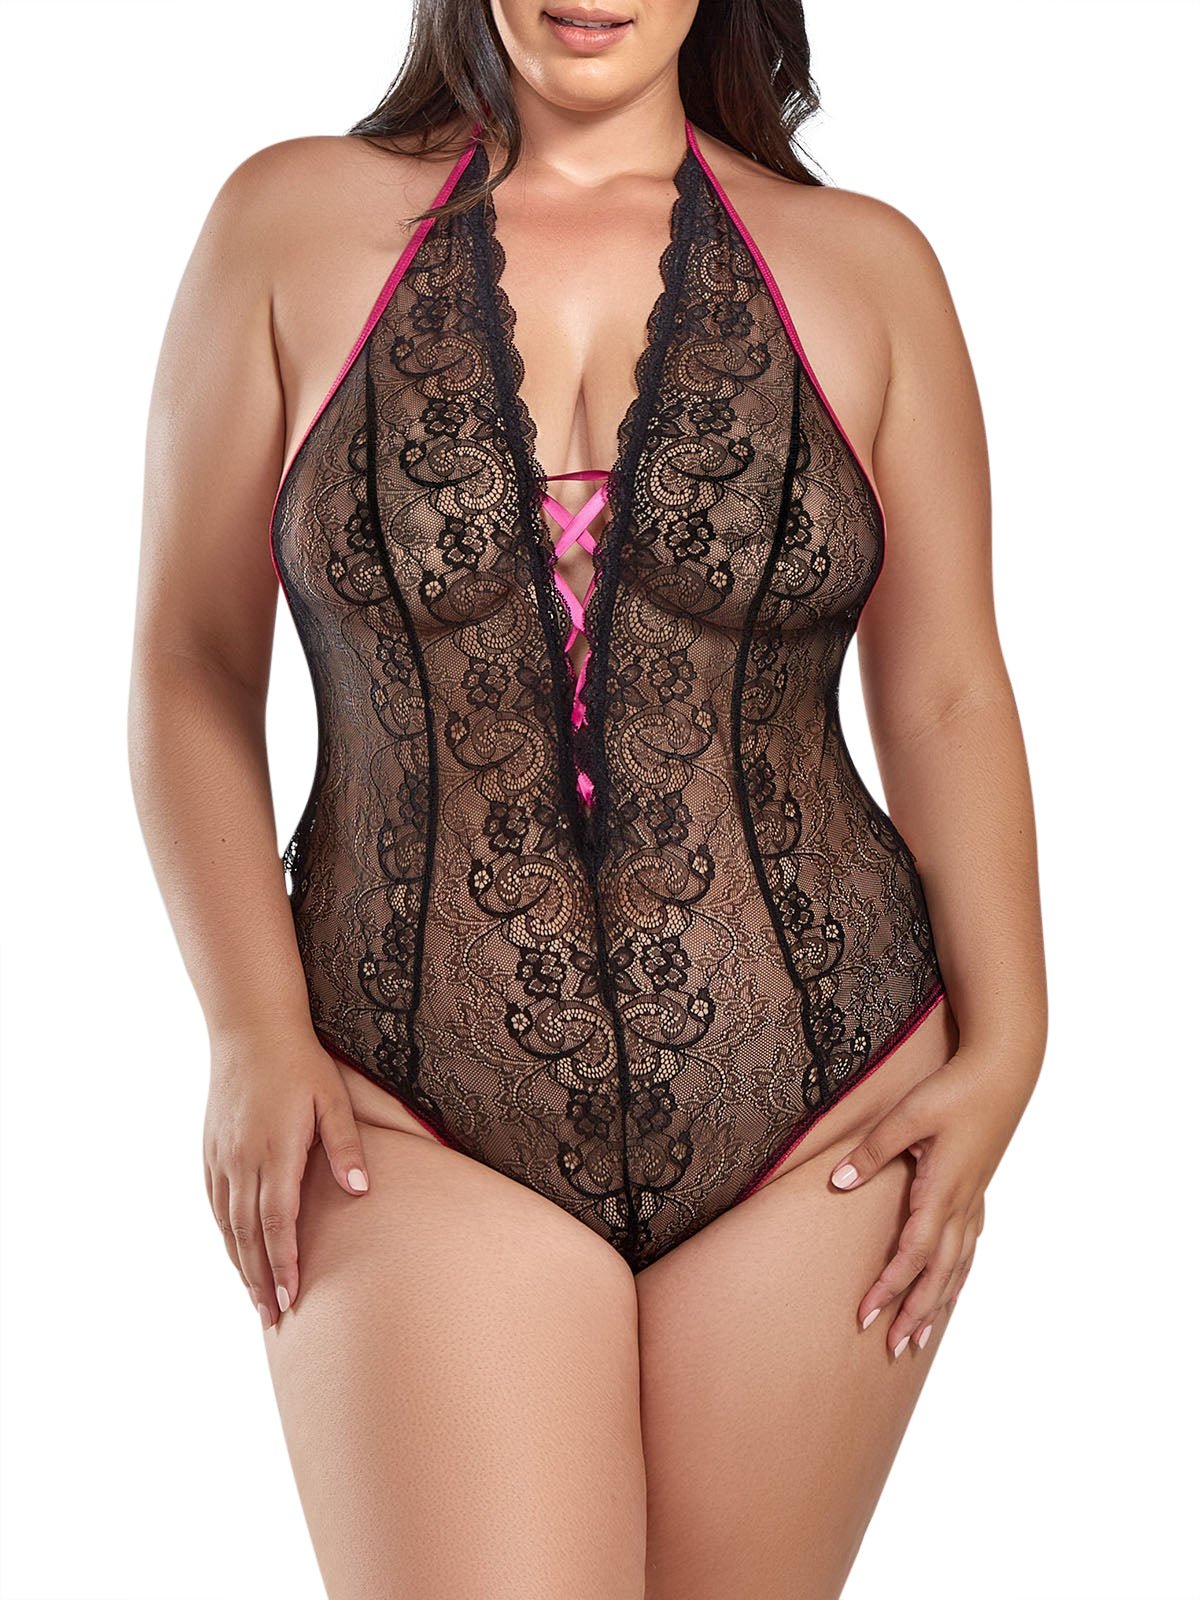 iCollection Teddy Women&#39;s Moonlit Nights Plus Size Teddy Lingerie